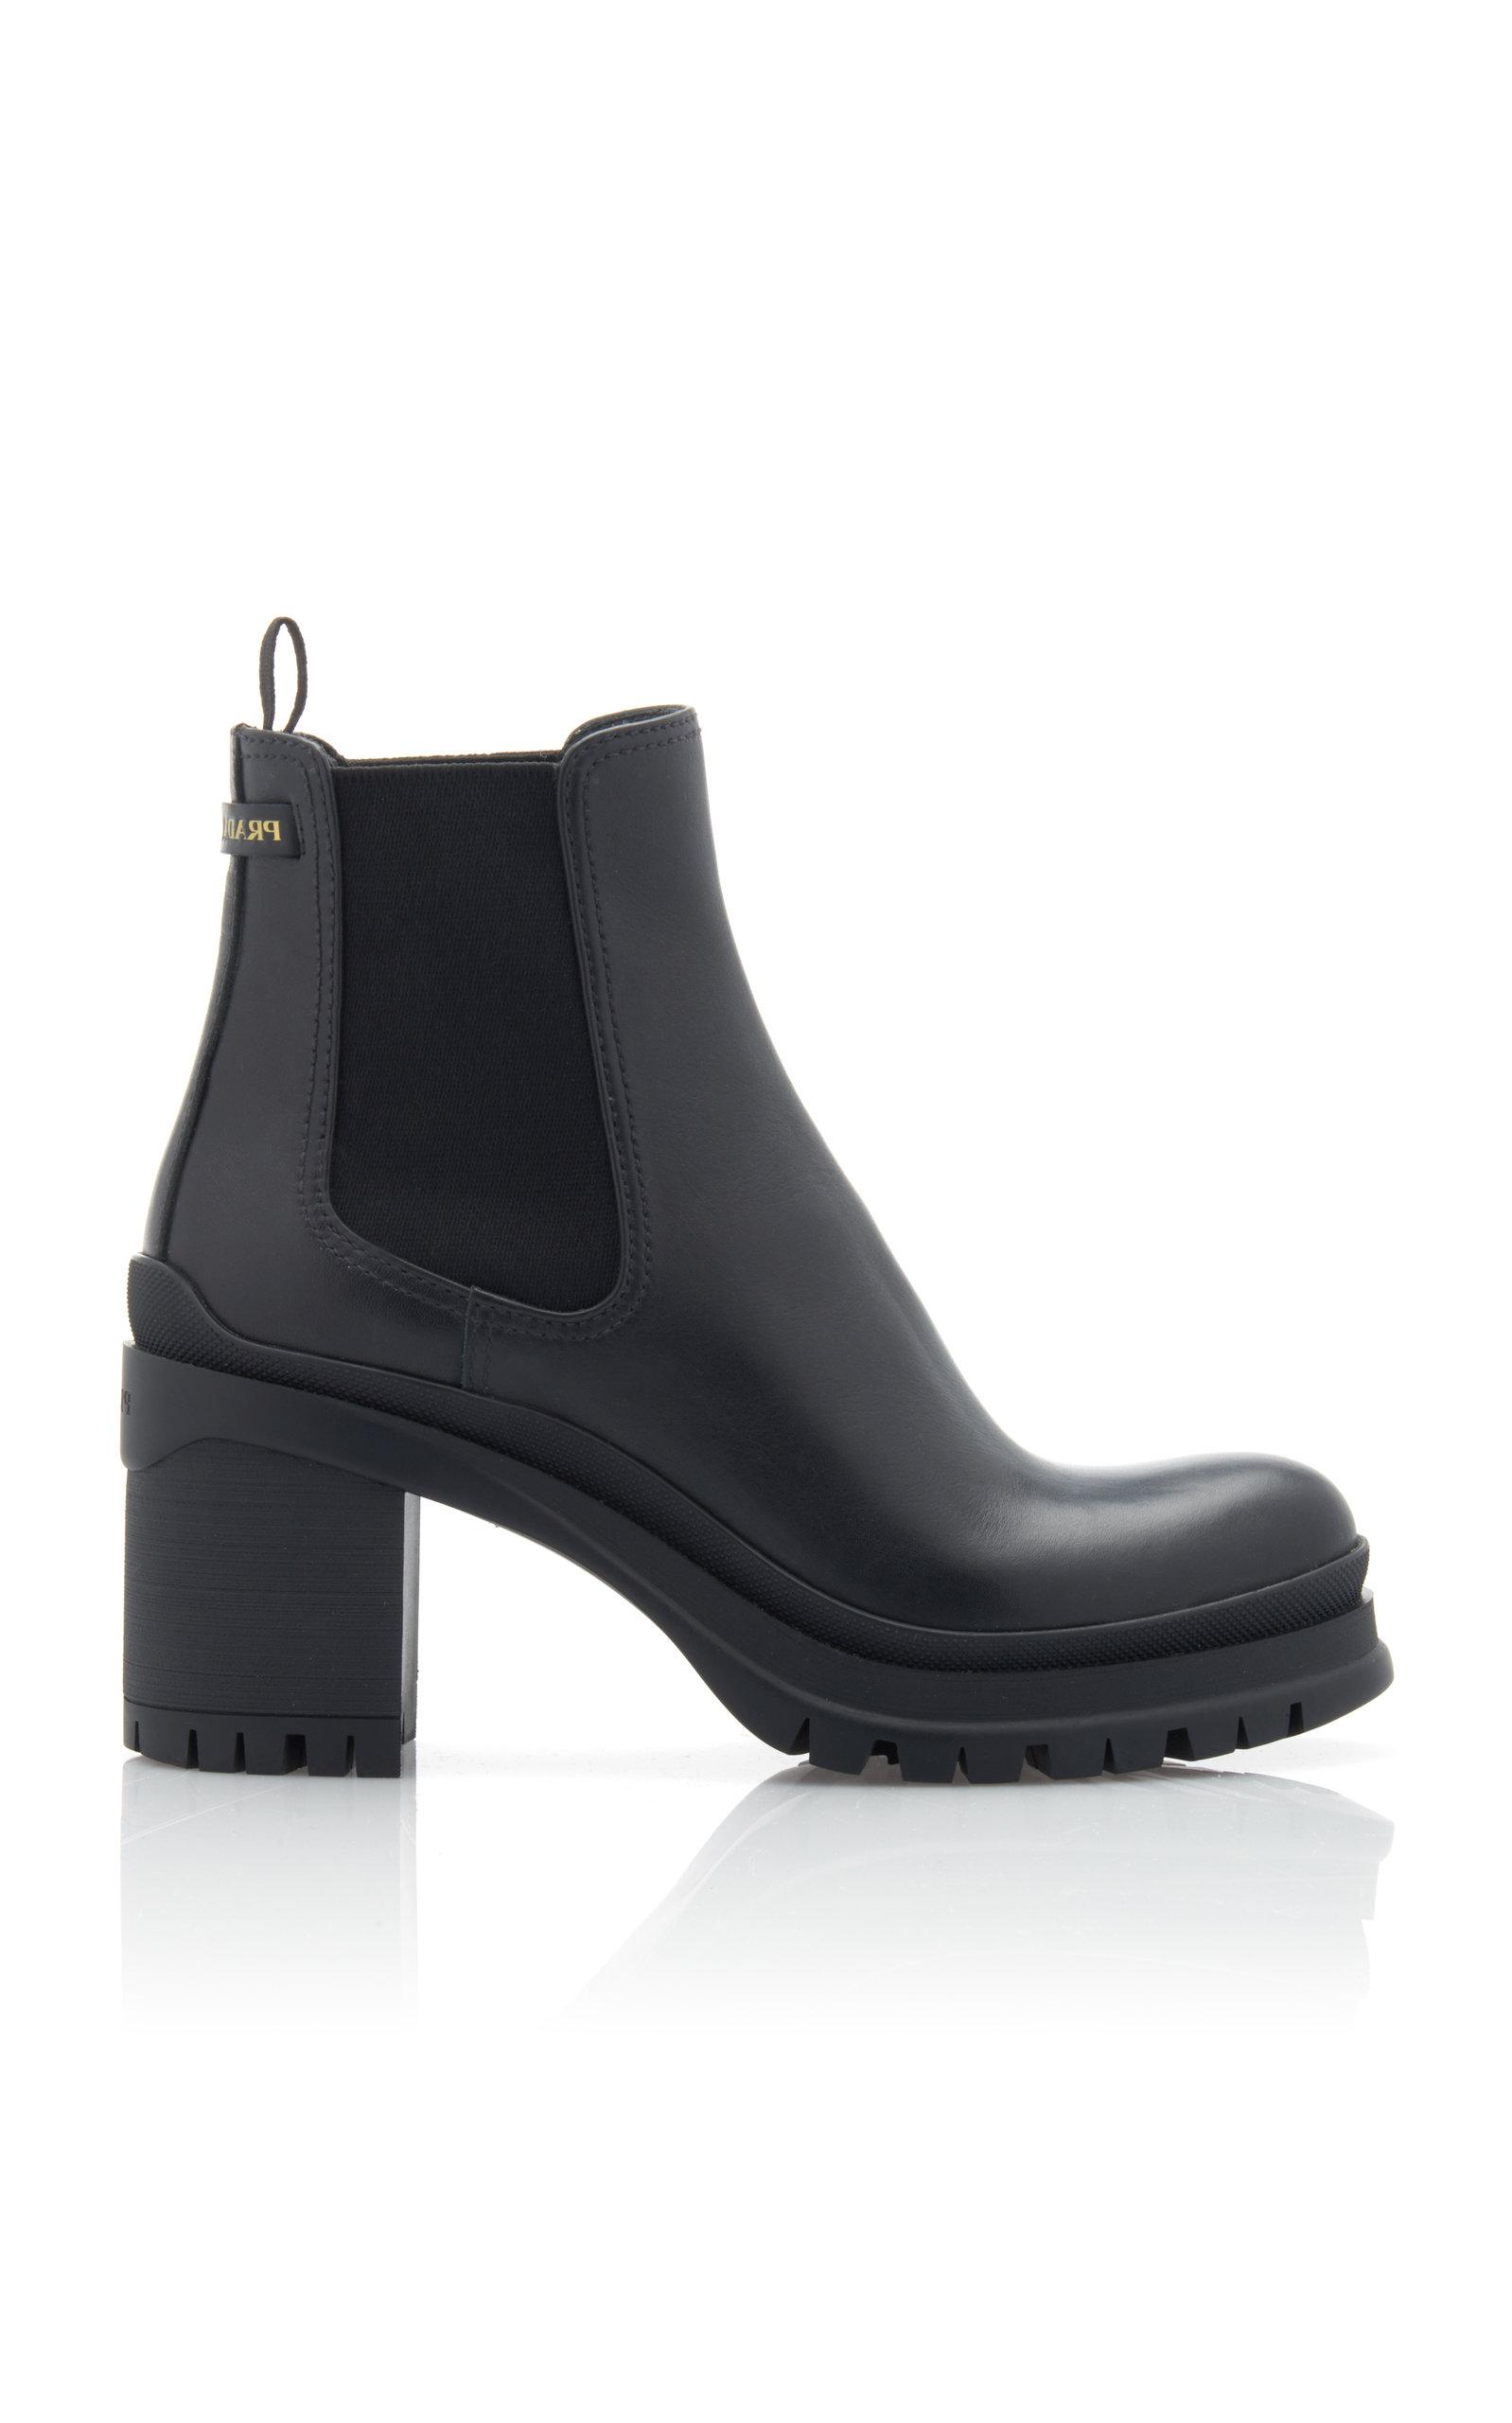 Prada Leather And Rubber Platform Ankle Boots in Black - Lyst